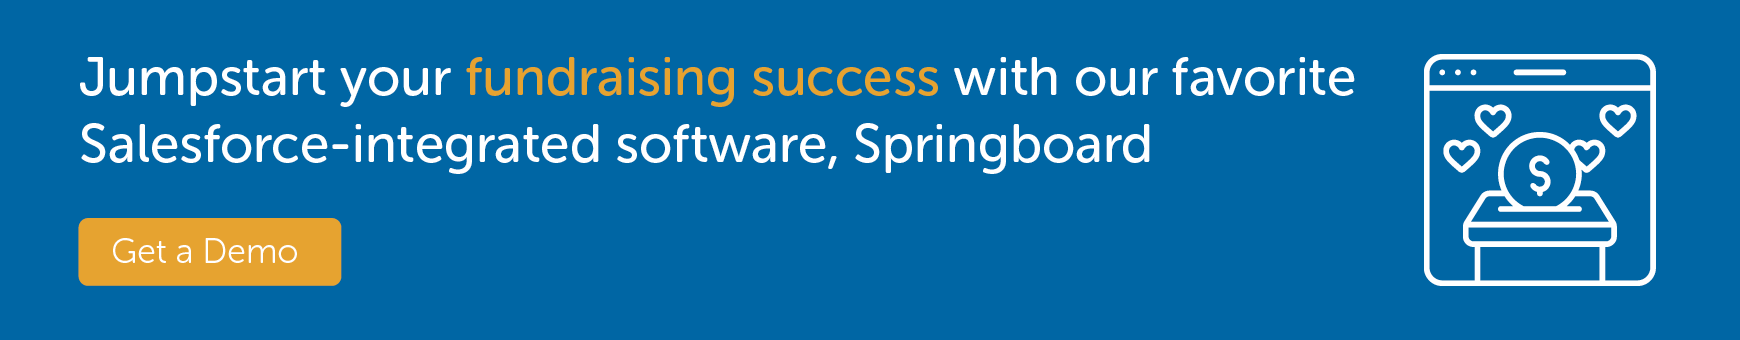 See how Springboard’s Salesforce peer-to-peer fundraising tools can maximize results.